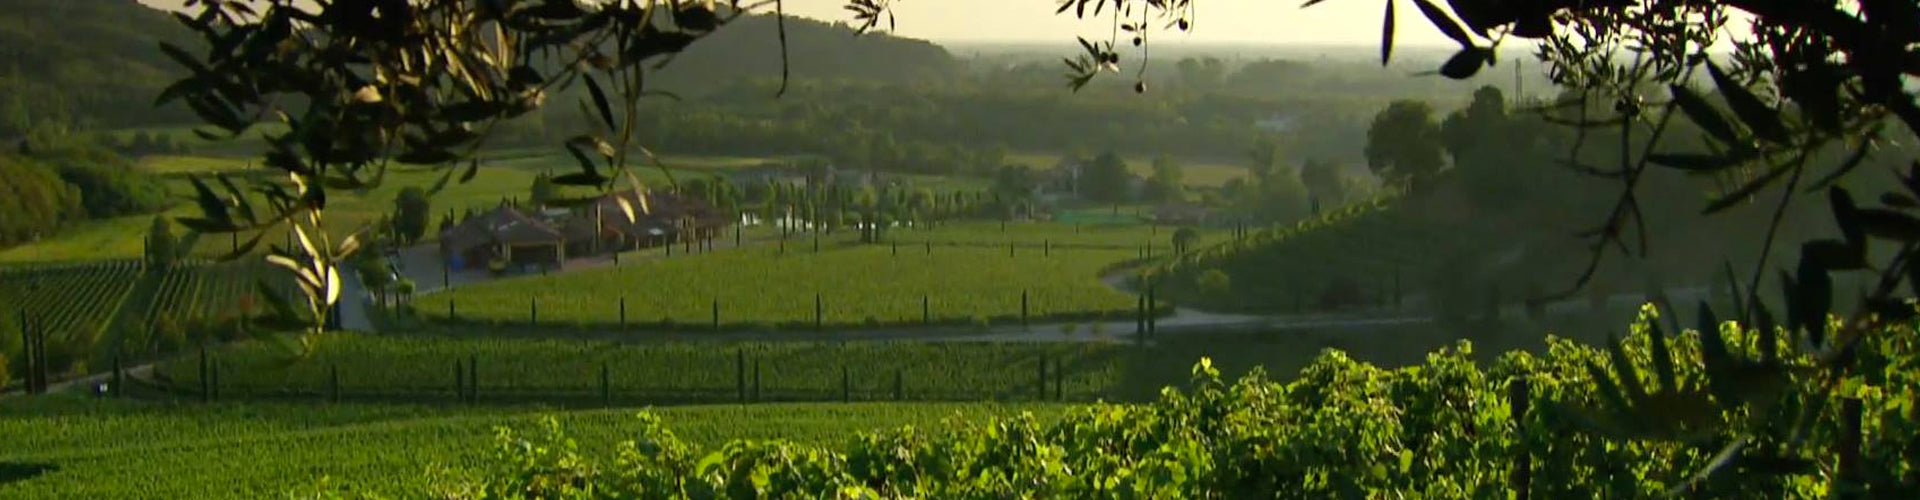 Jermann Winery and Vineyards in Friuli